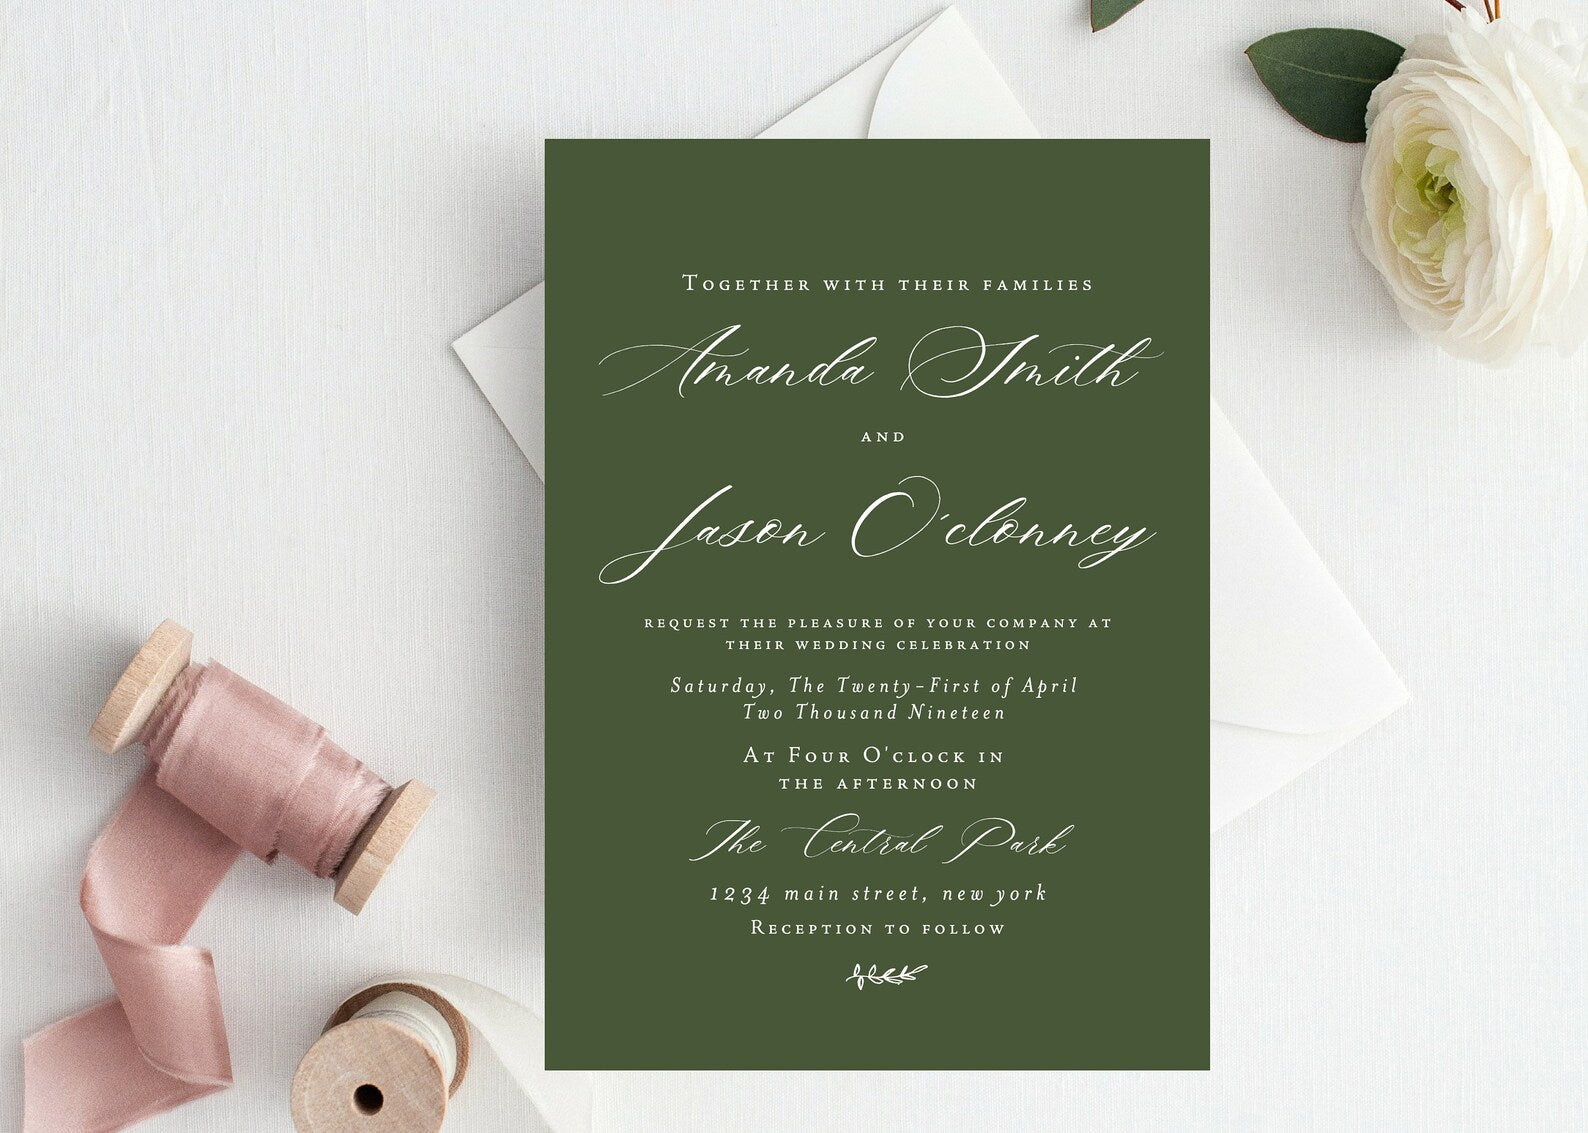 Calligraphy Wedding Invitation Template, Elegant Wedding Invitations, TRY BEFORE You BUY, 100% Editable, Instant Download, Rsvp and Details